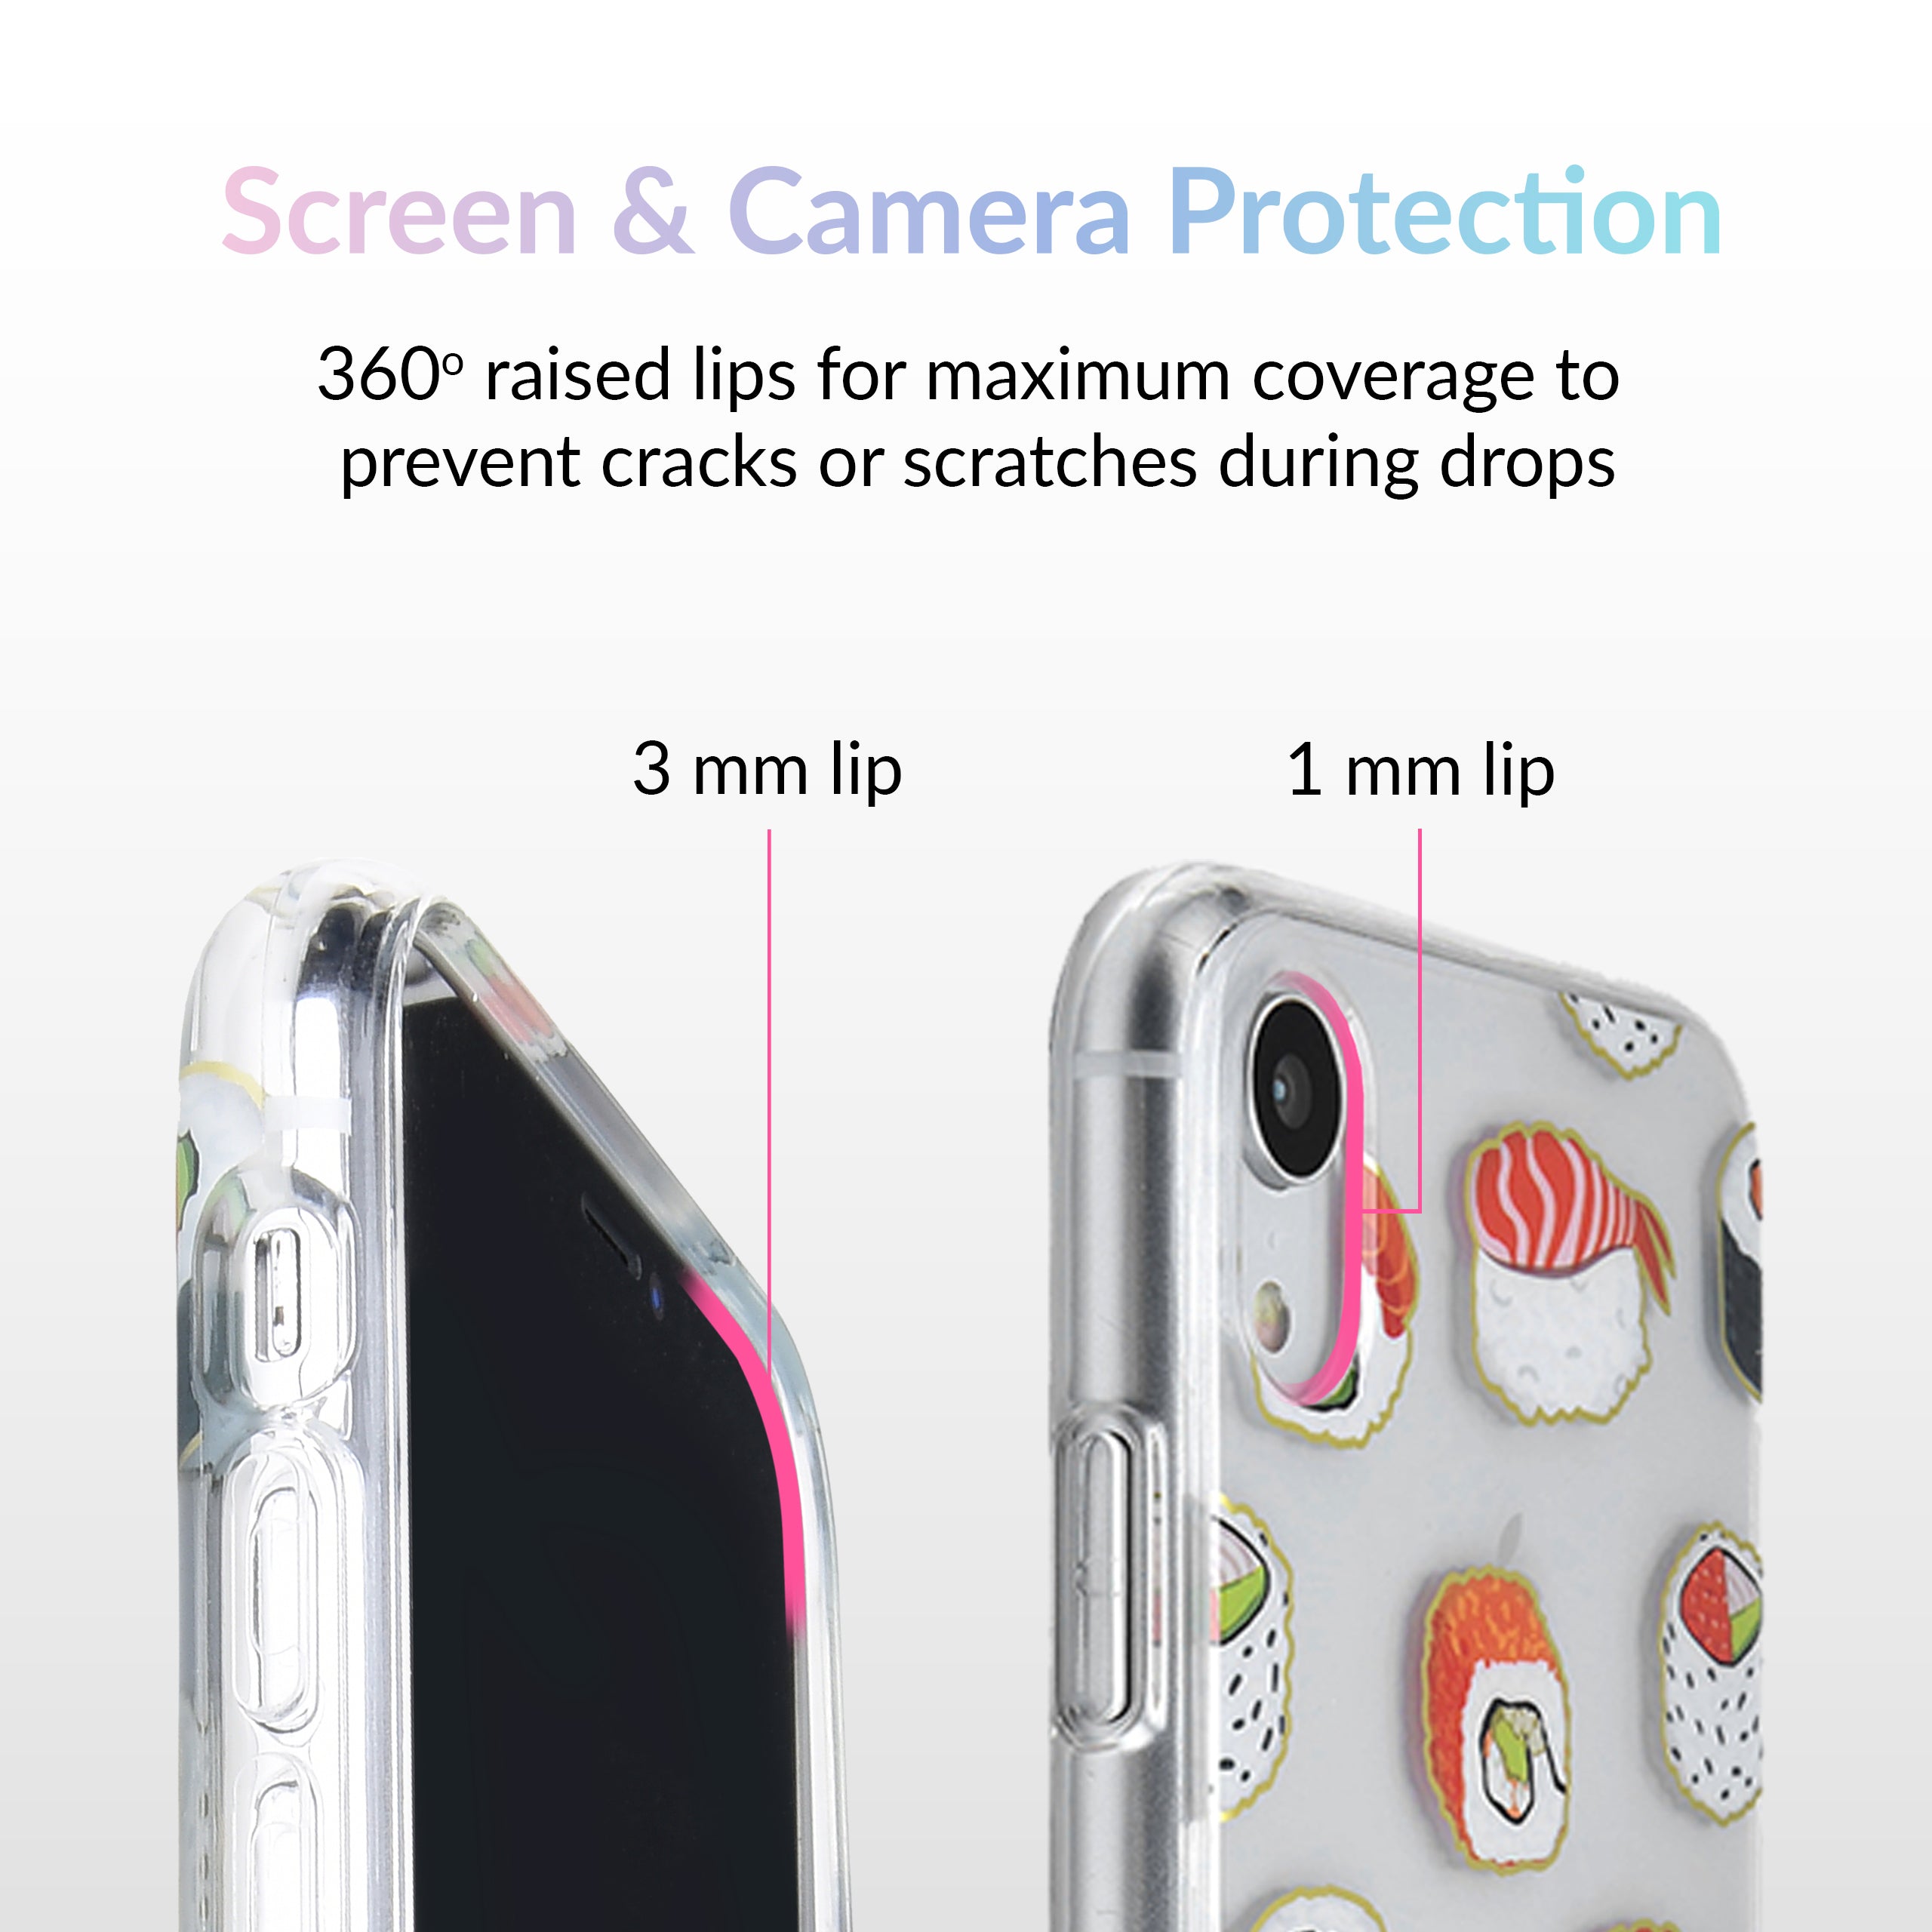 Sushi Clear iPhone Case